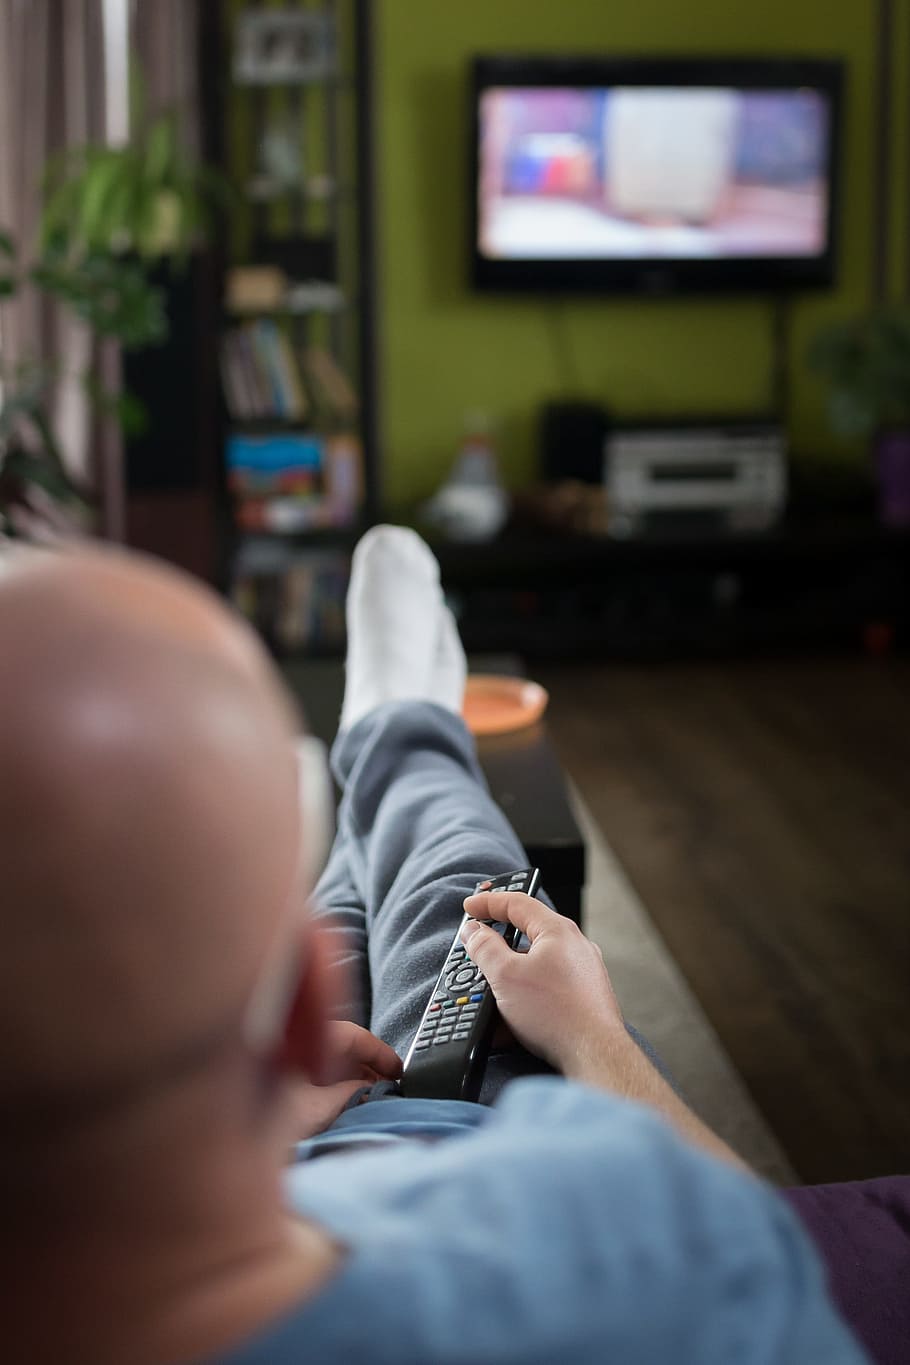 man watching television using remote control, television and radio